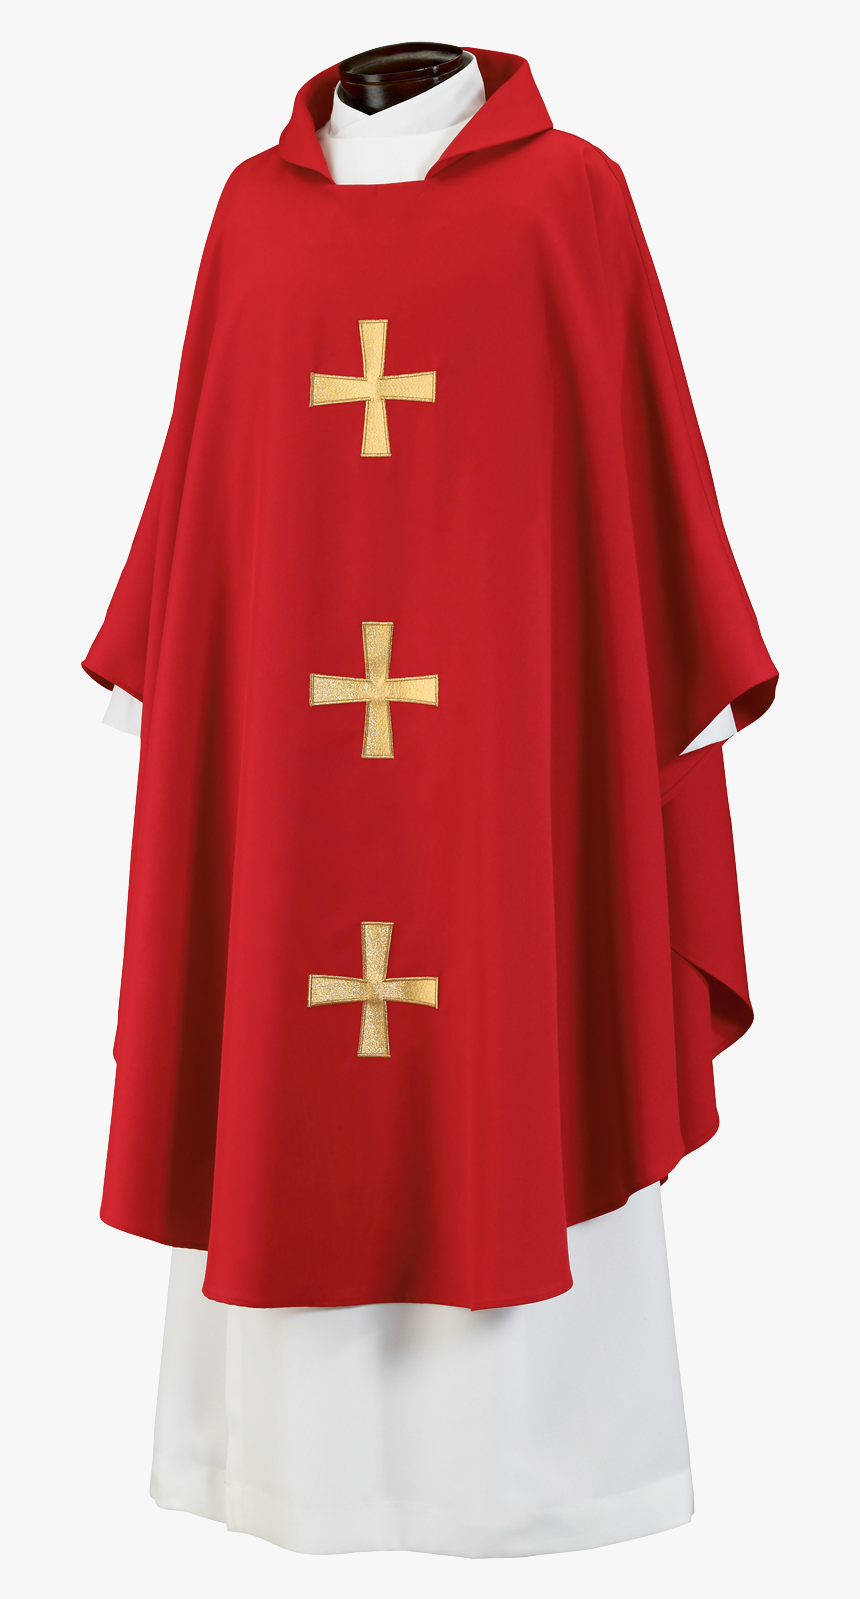 171 Chasuble Red Lancer W/gold Lame Crosses - Cross, HD Png Download, Free Download